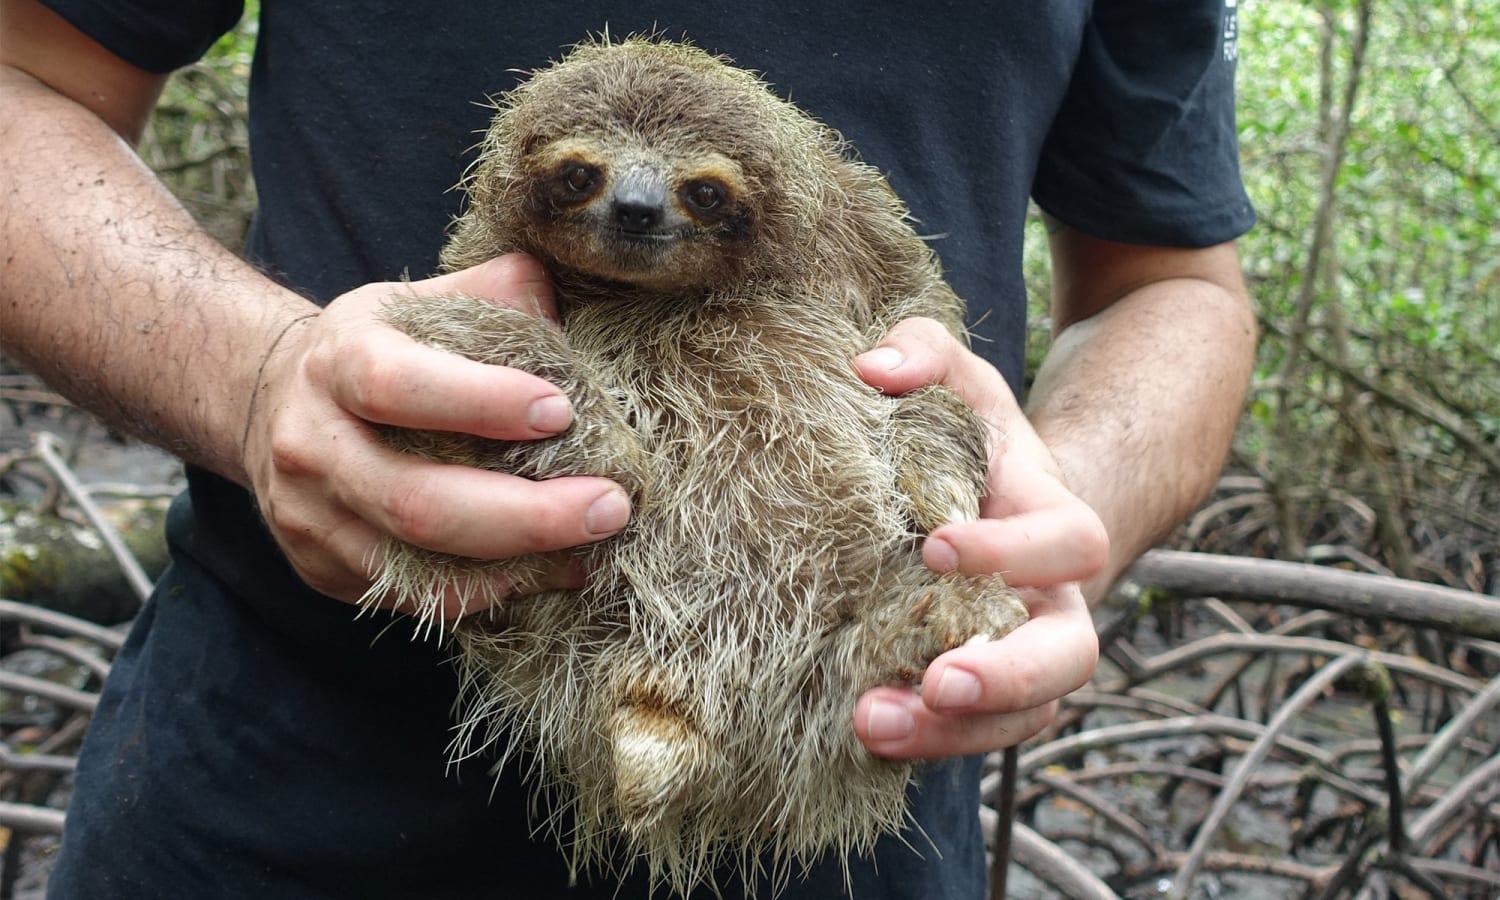 TIL of the Pigmy Three-Toed Sloth on the Panama island of Escudo will only eat the leaves of Red Mangrove trees which contain a fungus with a chemical profile similar to Valium, leaving the sloths in what seems like a life-long high from their main diet